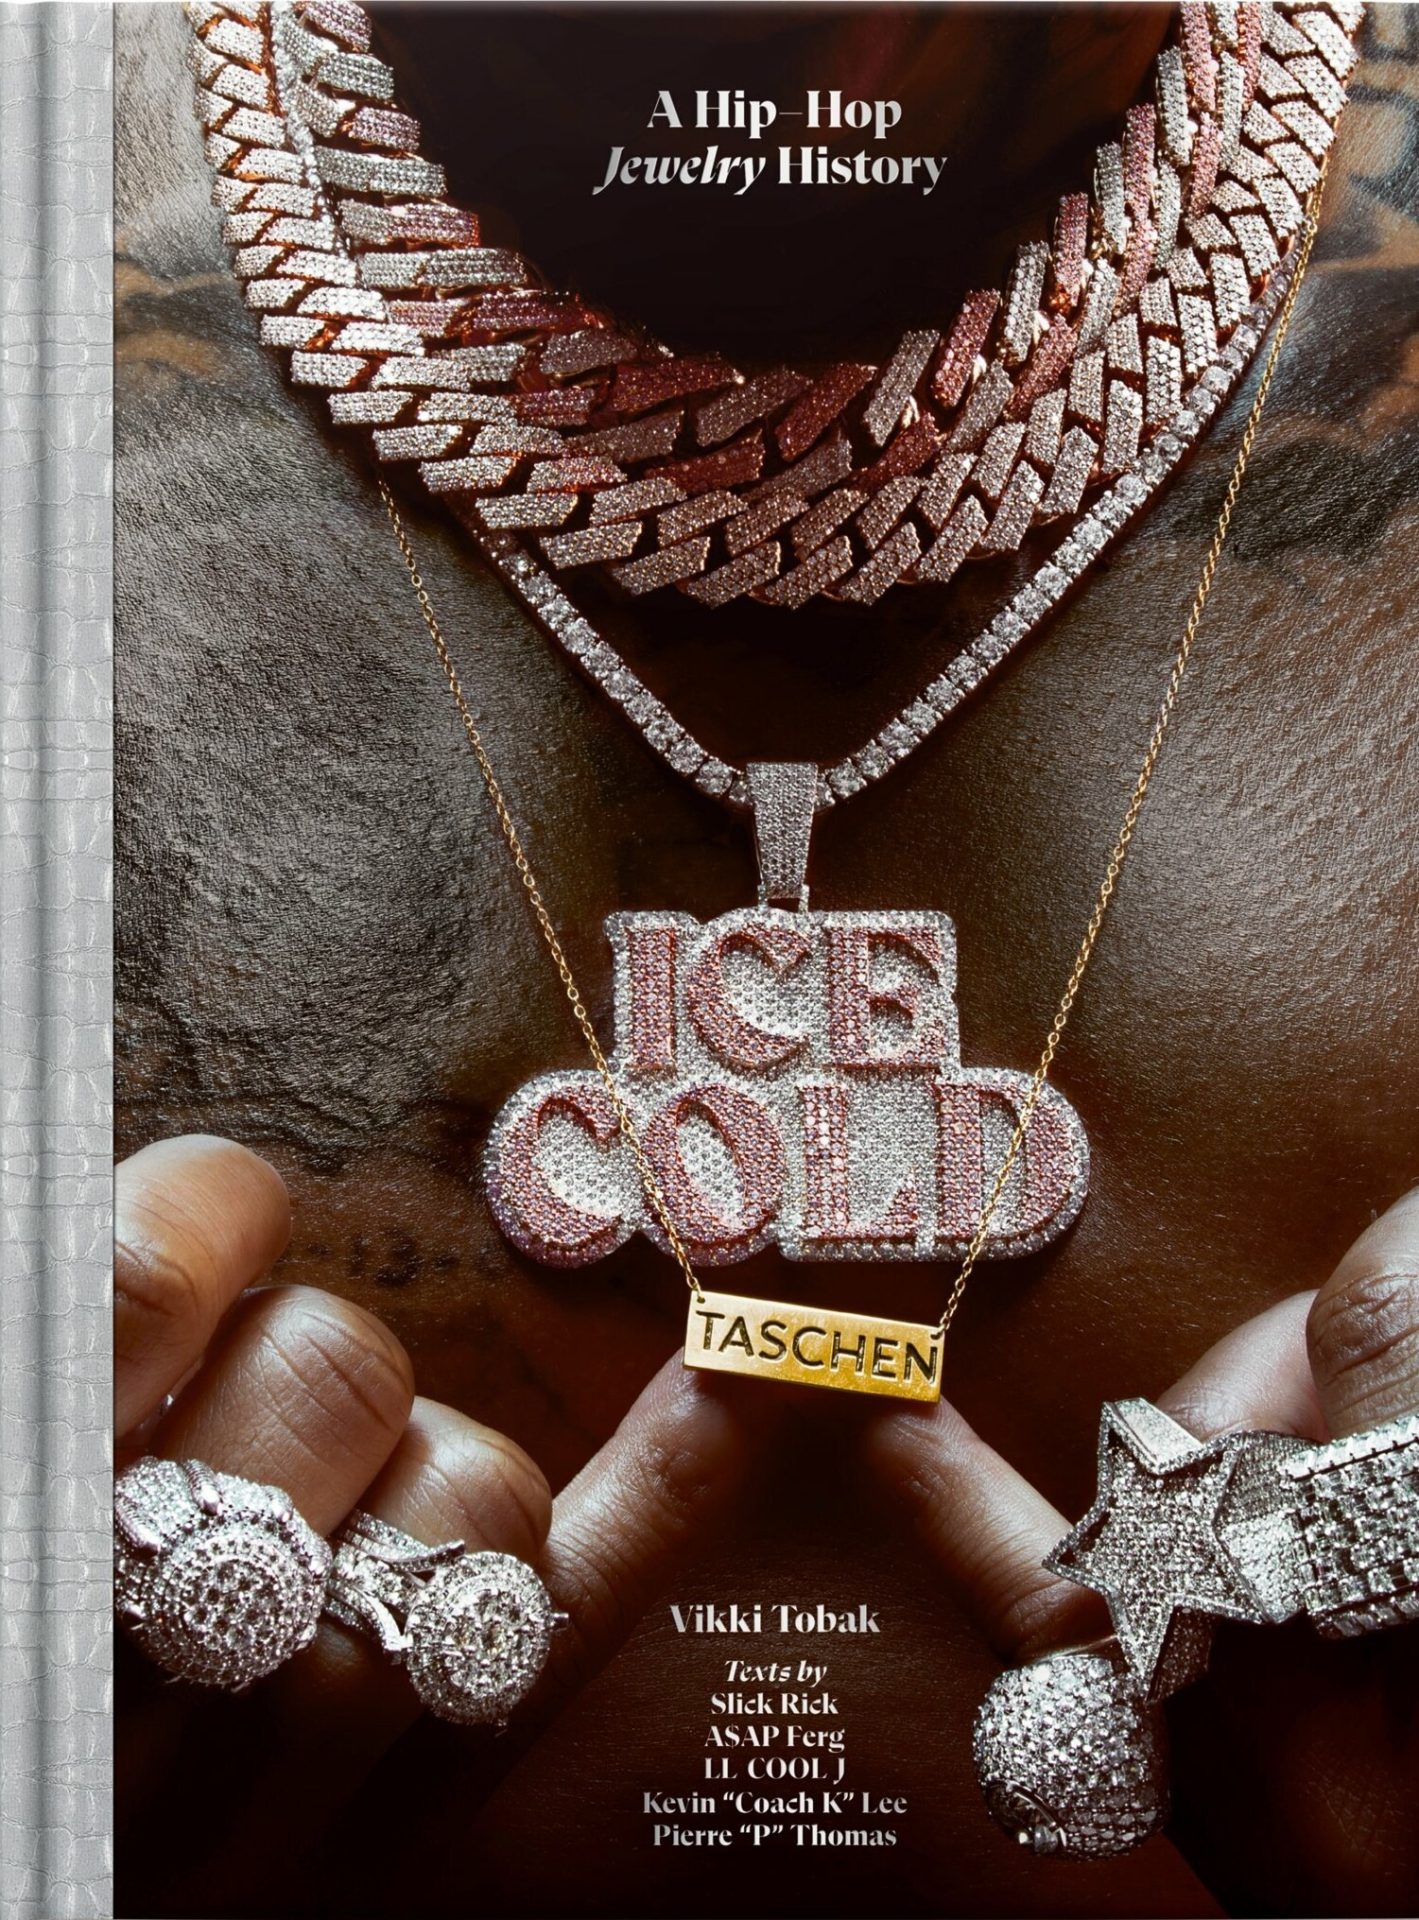 Ice Cold. A Hip-Hop Jewelry History.